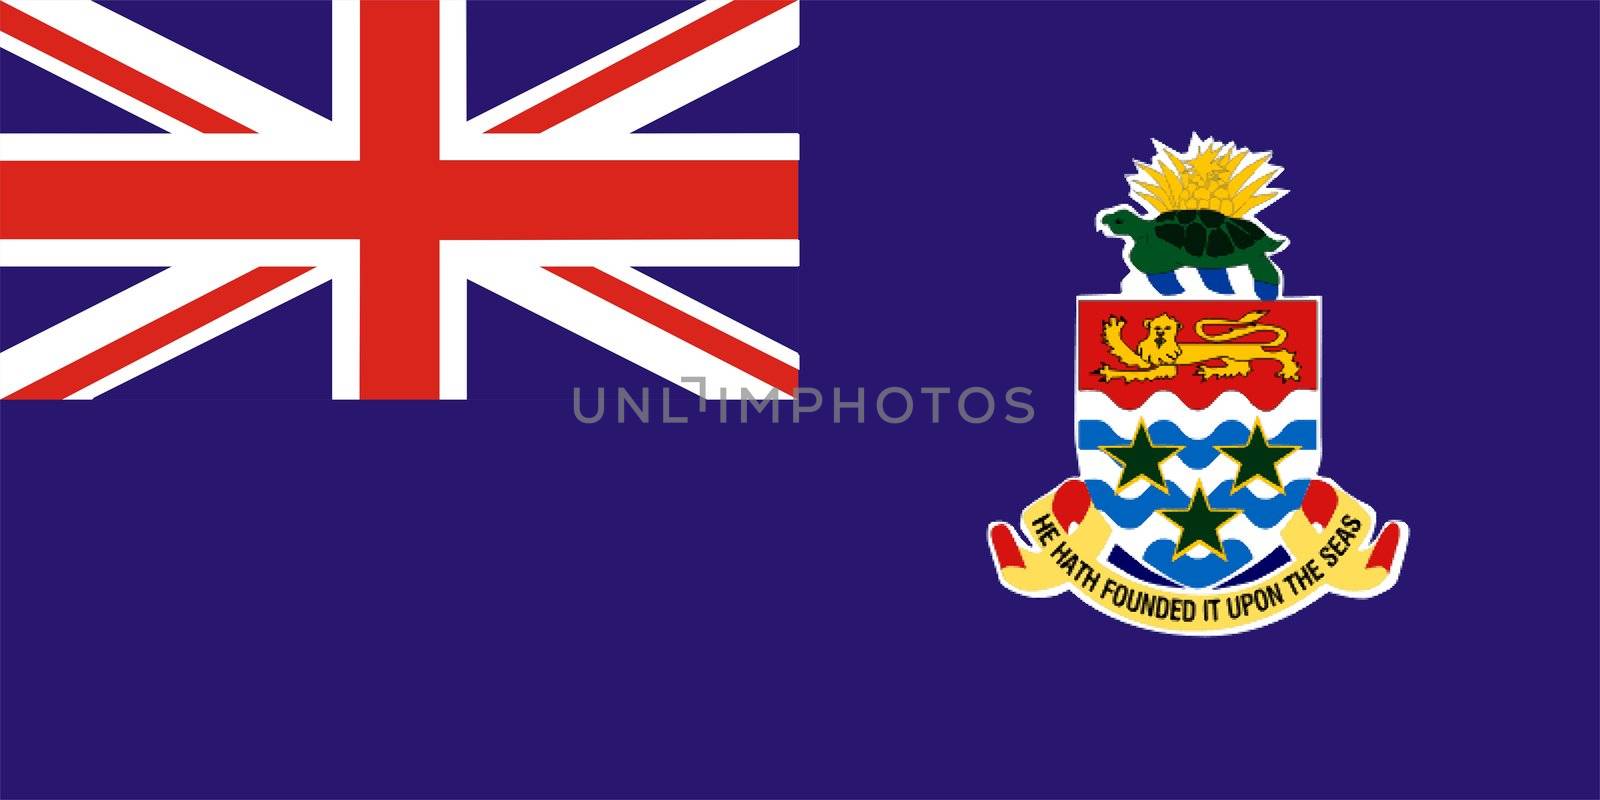 Very large version of the flag of Cayman Islands